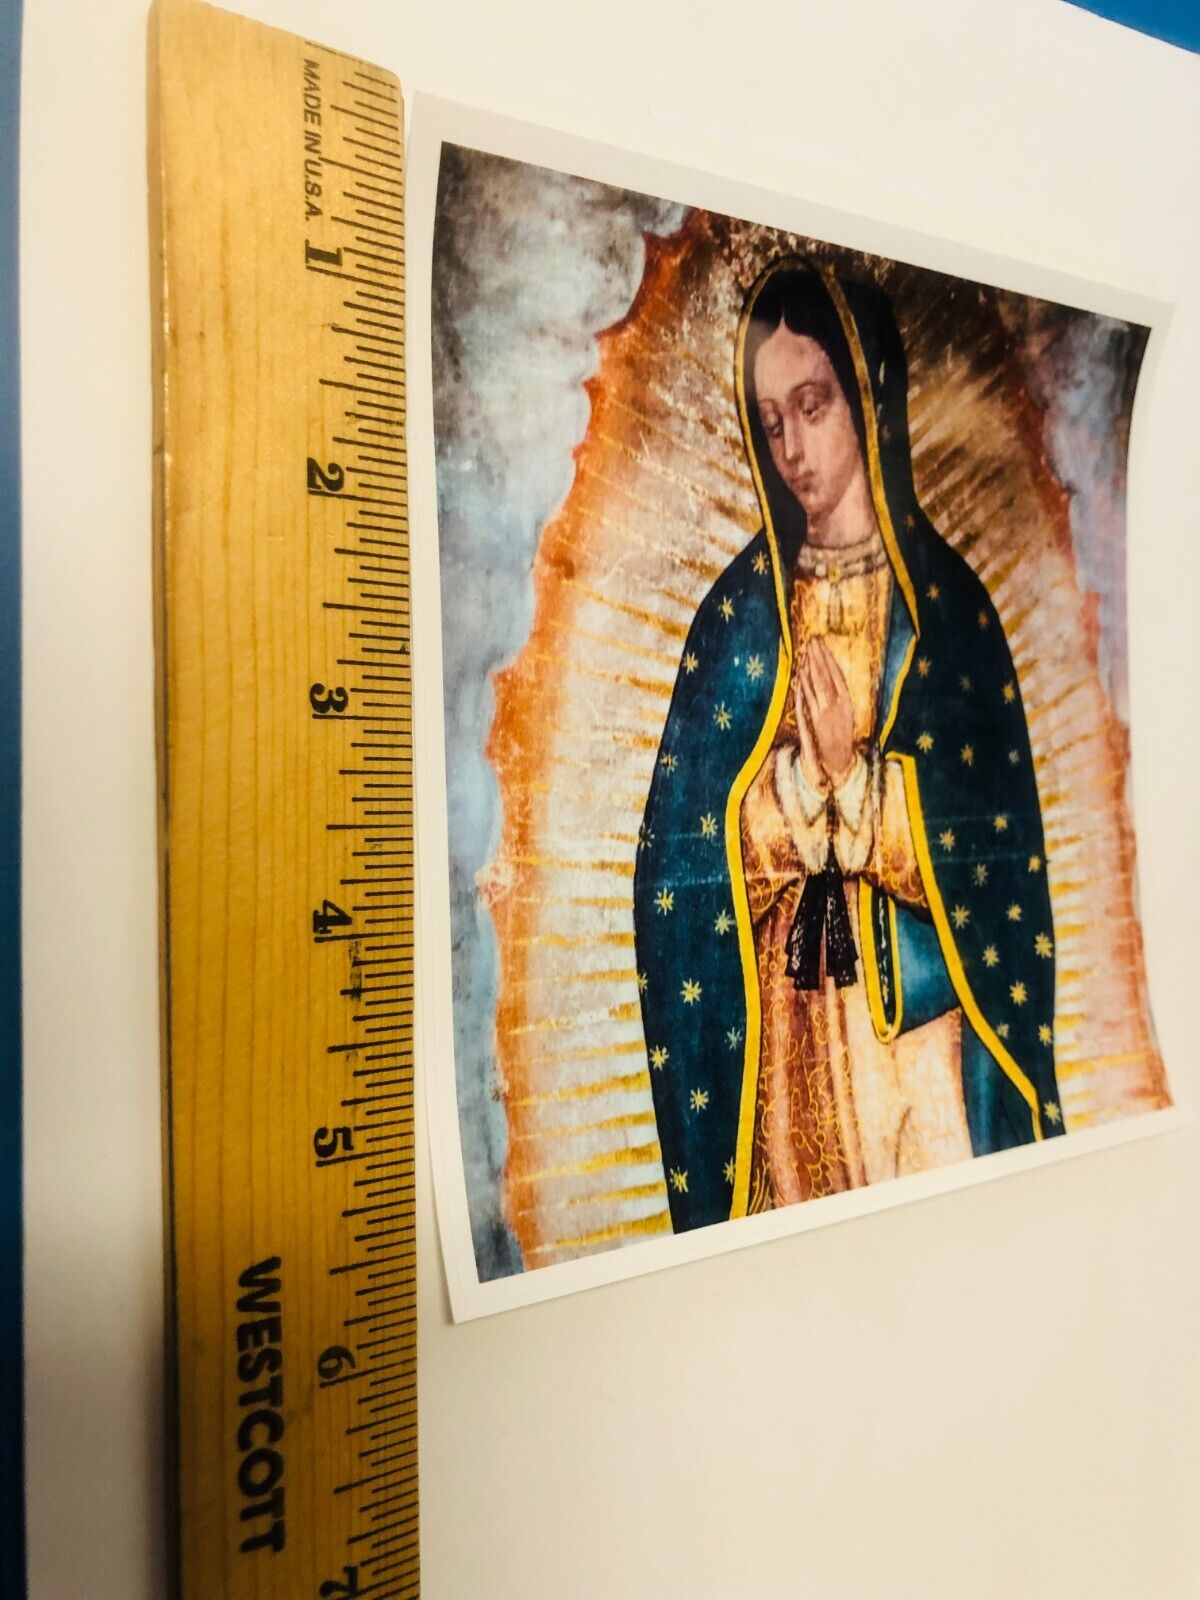 Our Lady of Guadalupe 5.75" x 5.75" Custom Glossy Decal Sticker, New - Bob and Penny Lord